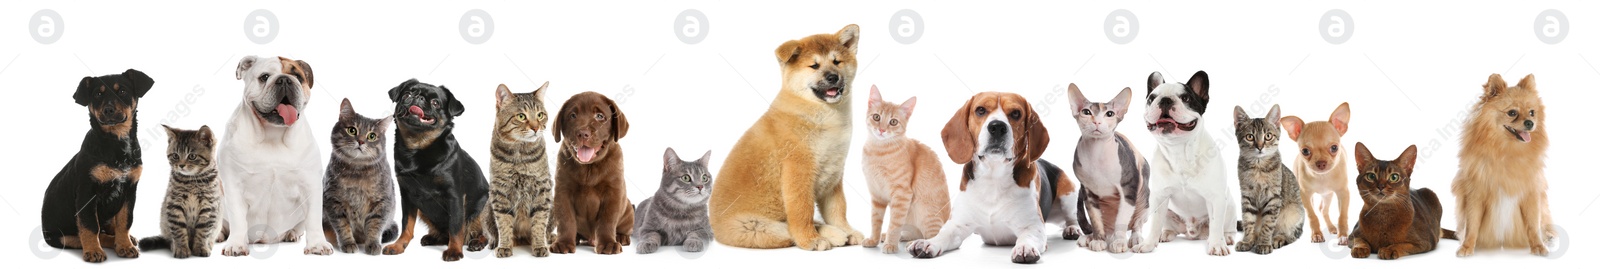 Image of Cute dogs and cats on white background. Banner design